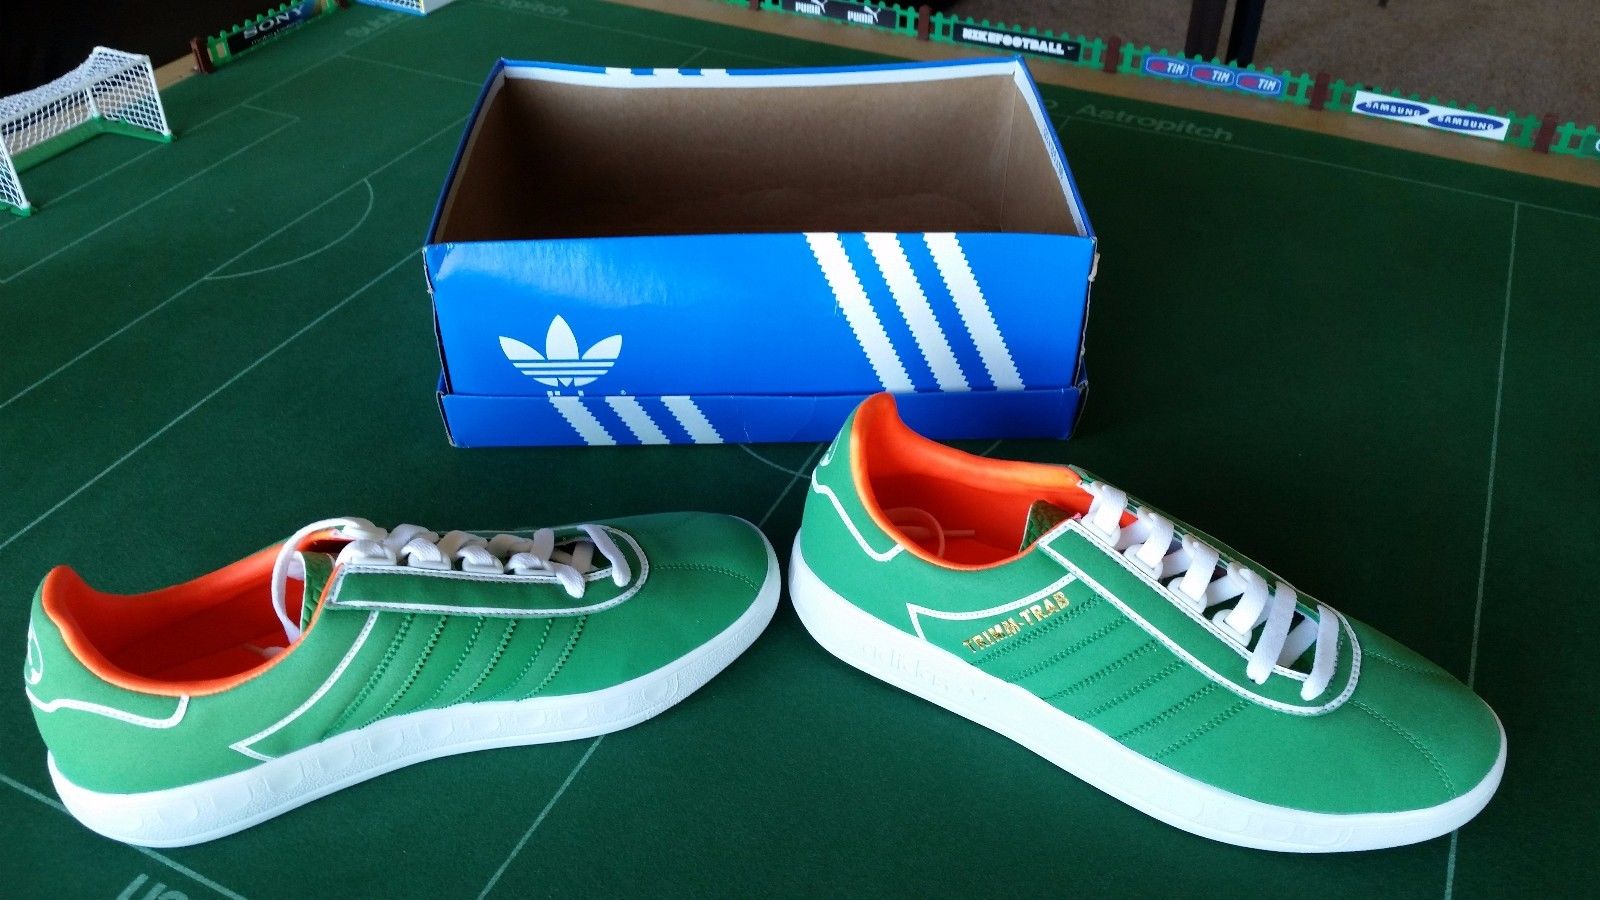 Adidas launches another Subbuteo trainer in classic green